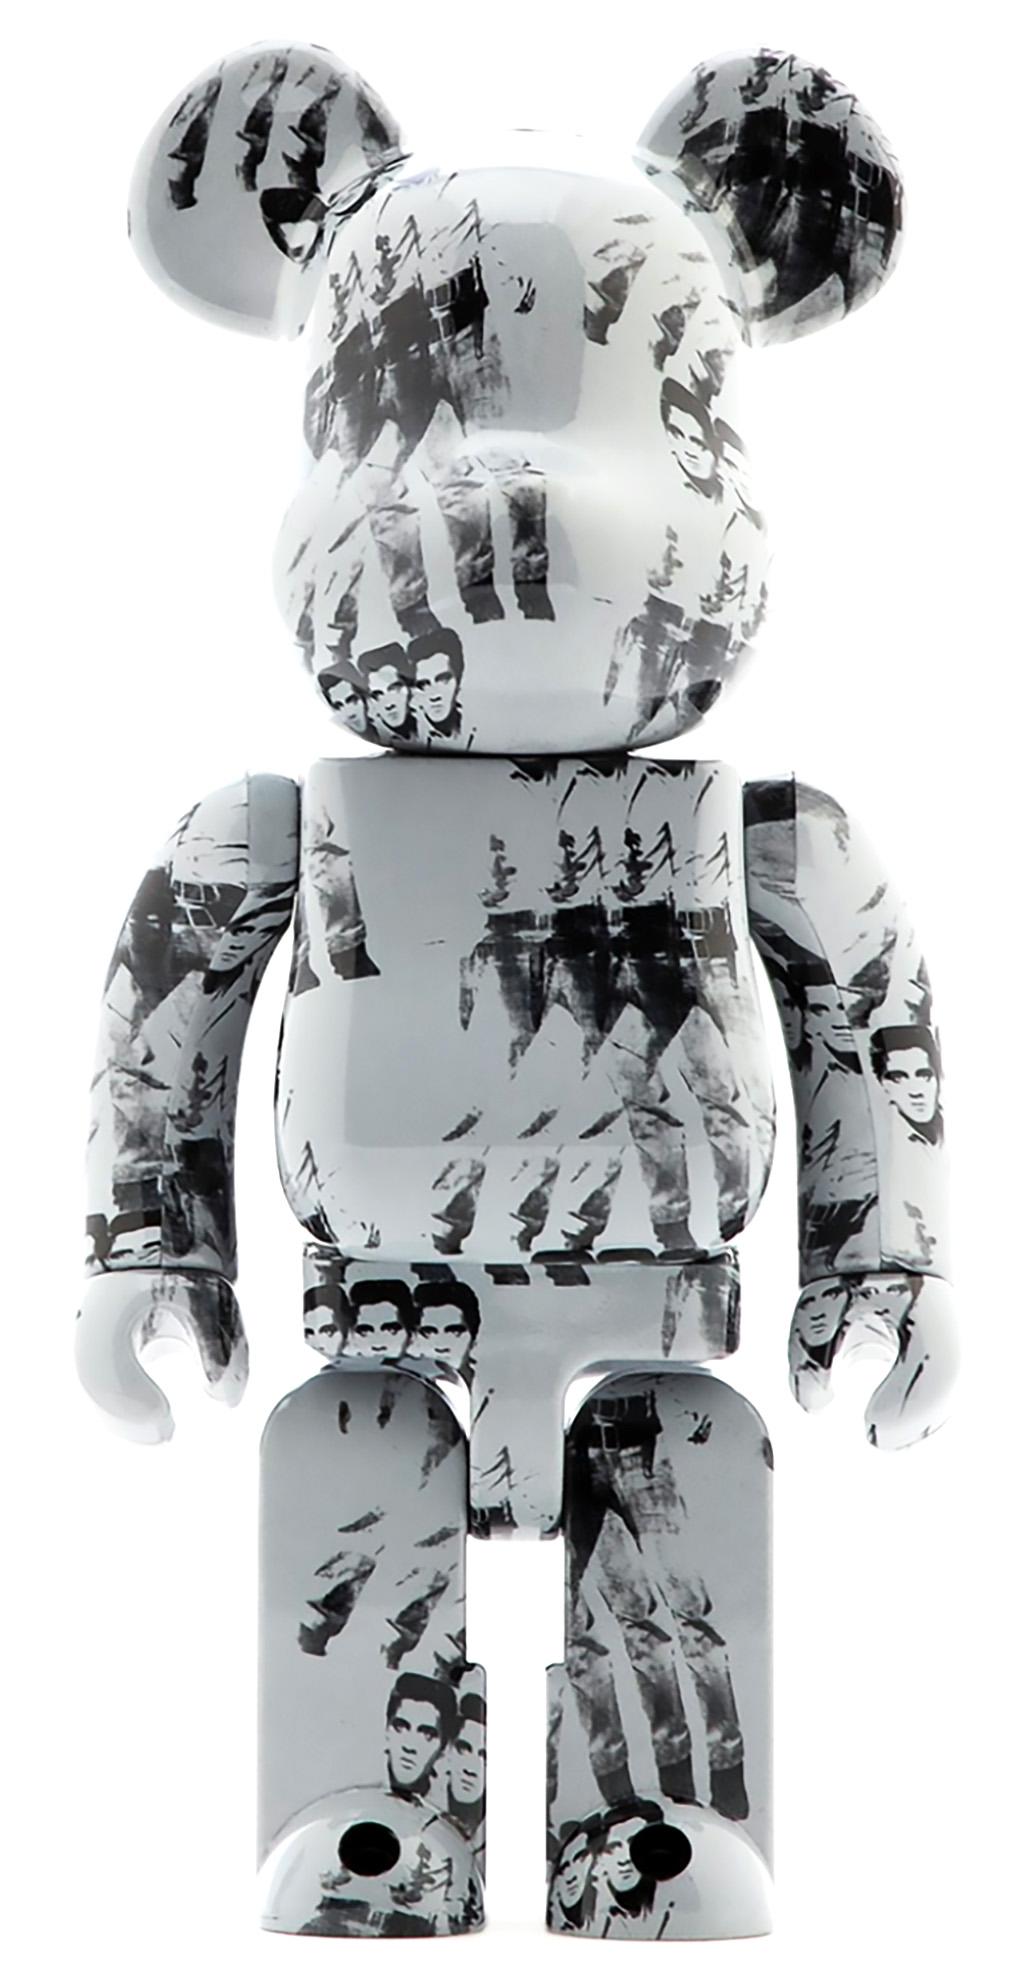 Andy Warhol Bearbrick 400% set of 4 works (Warhol BE@RBRICK) - Contemporary Print by (after) Andy Warhol